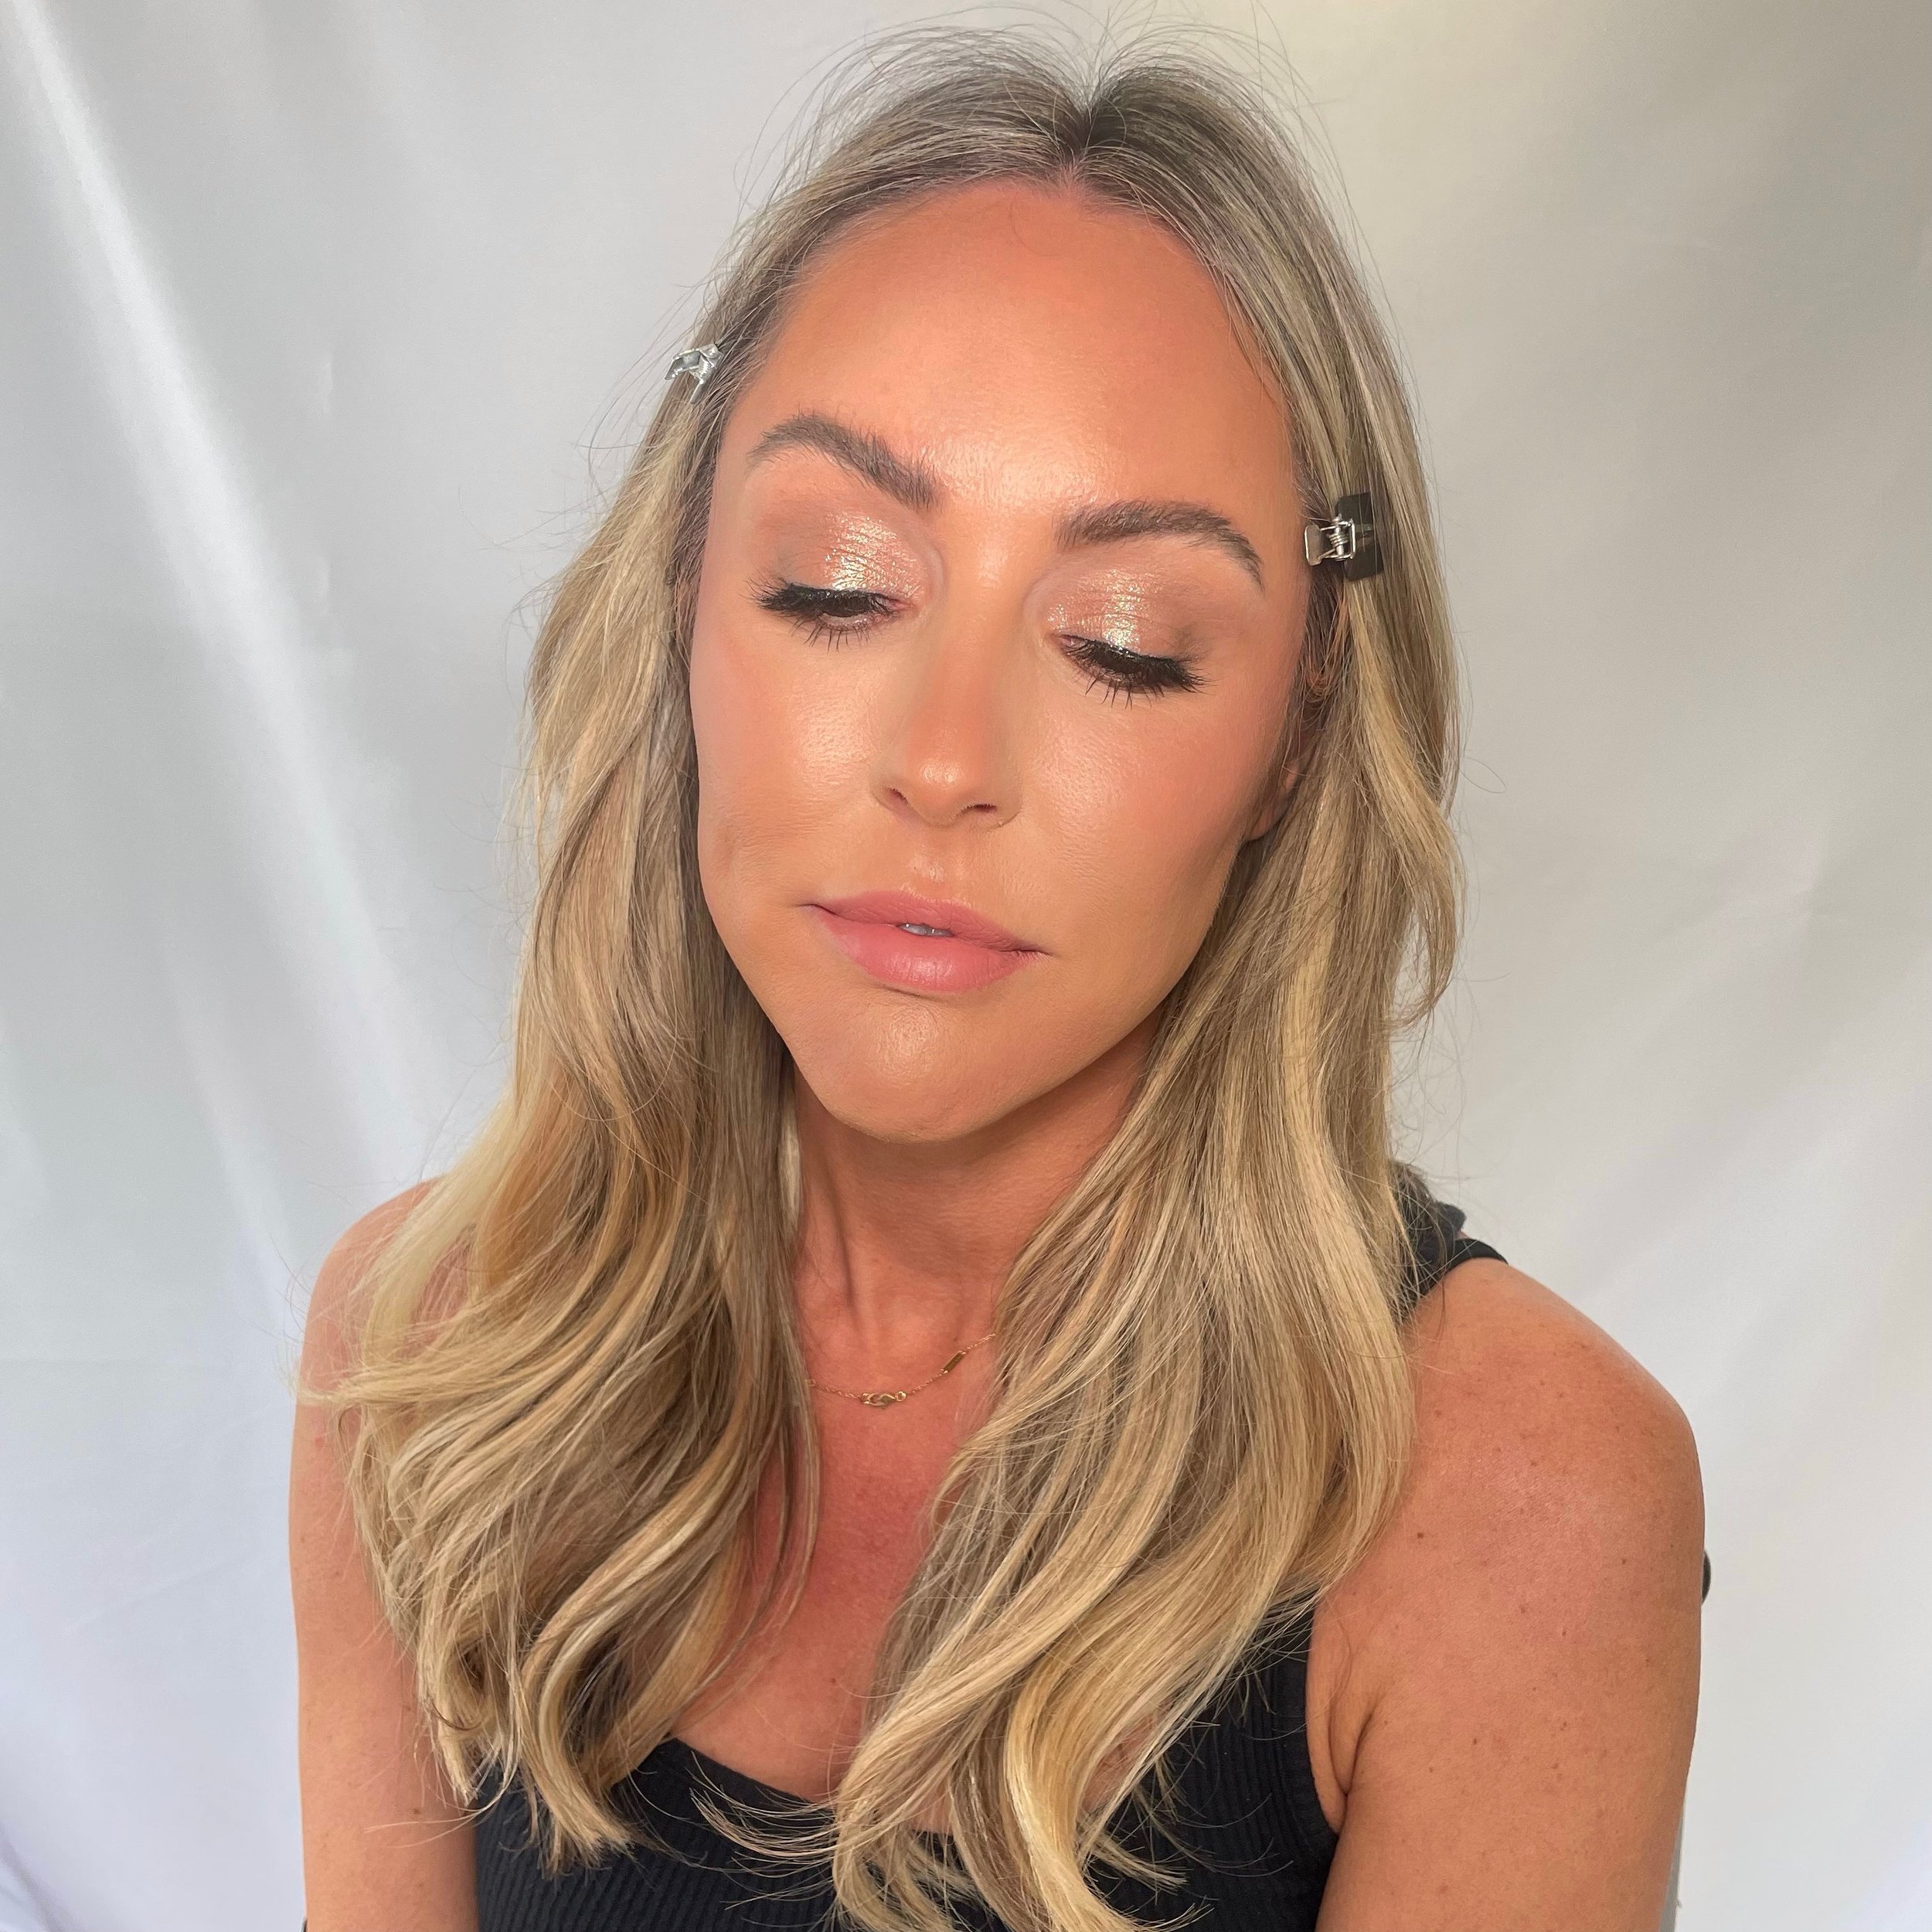 ✨ Rachel ✨

It was so lovely to have this beauty back in my chair - soft golden glam! ☀️💋

* 100% REAL SKIN - no edits, no filters! *

#makeupartistberkshire #makeupartistsurrey #makeupartisthampshire #hampshiremakeupartist #surreymakeupartist #berk